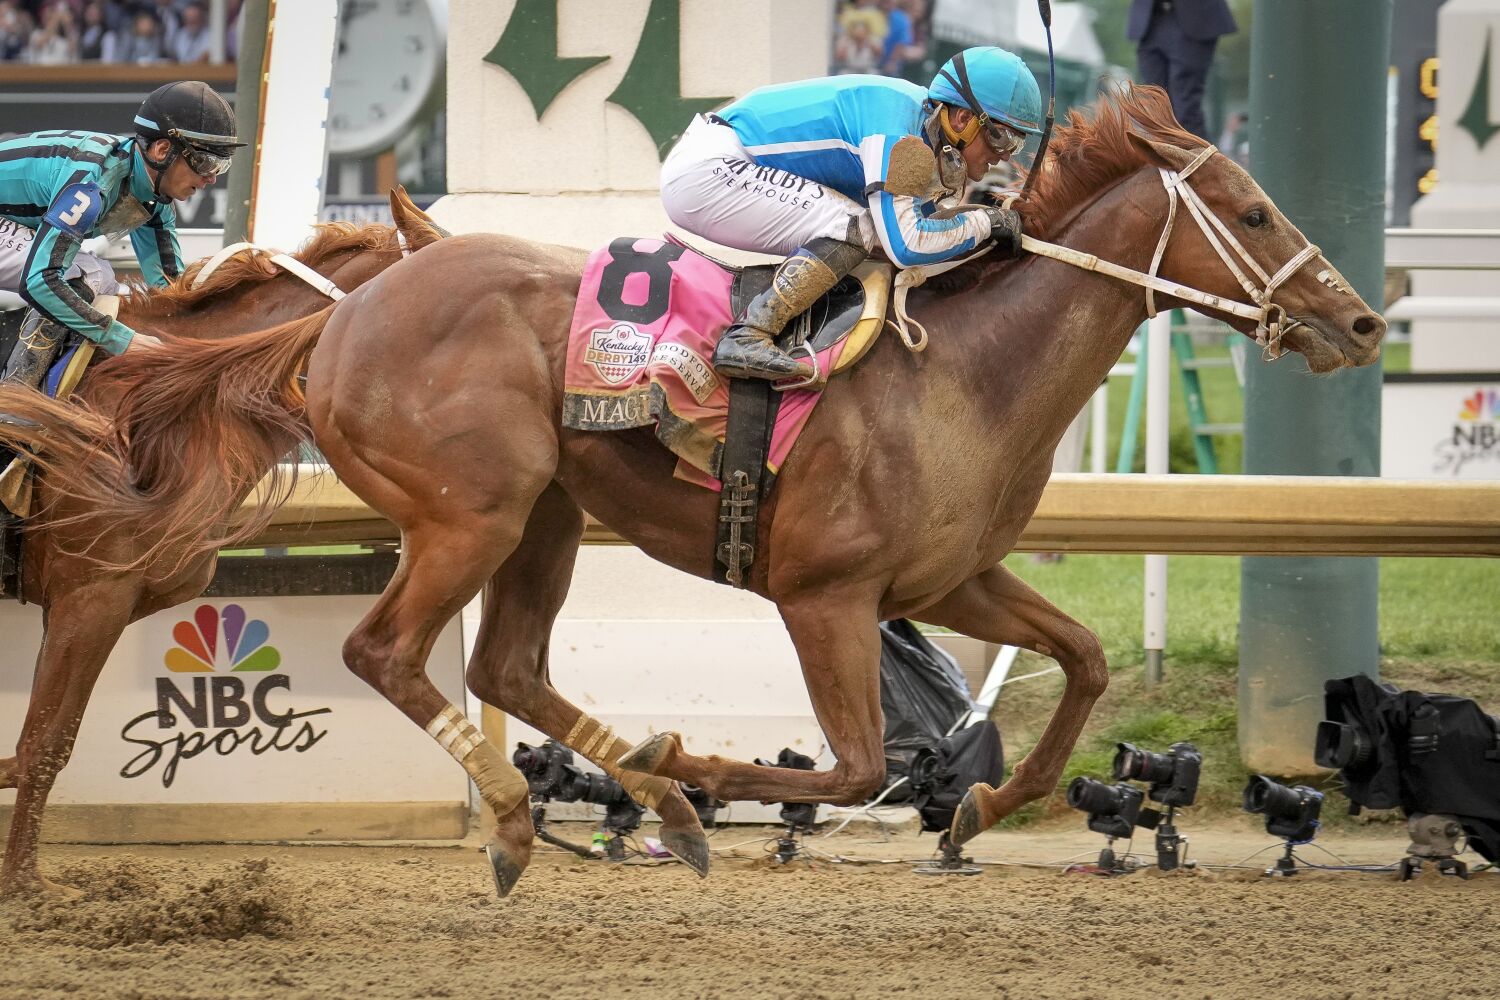 Preakness Stakes storylines: All eyes on Mage's Triple Crown quest